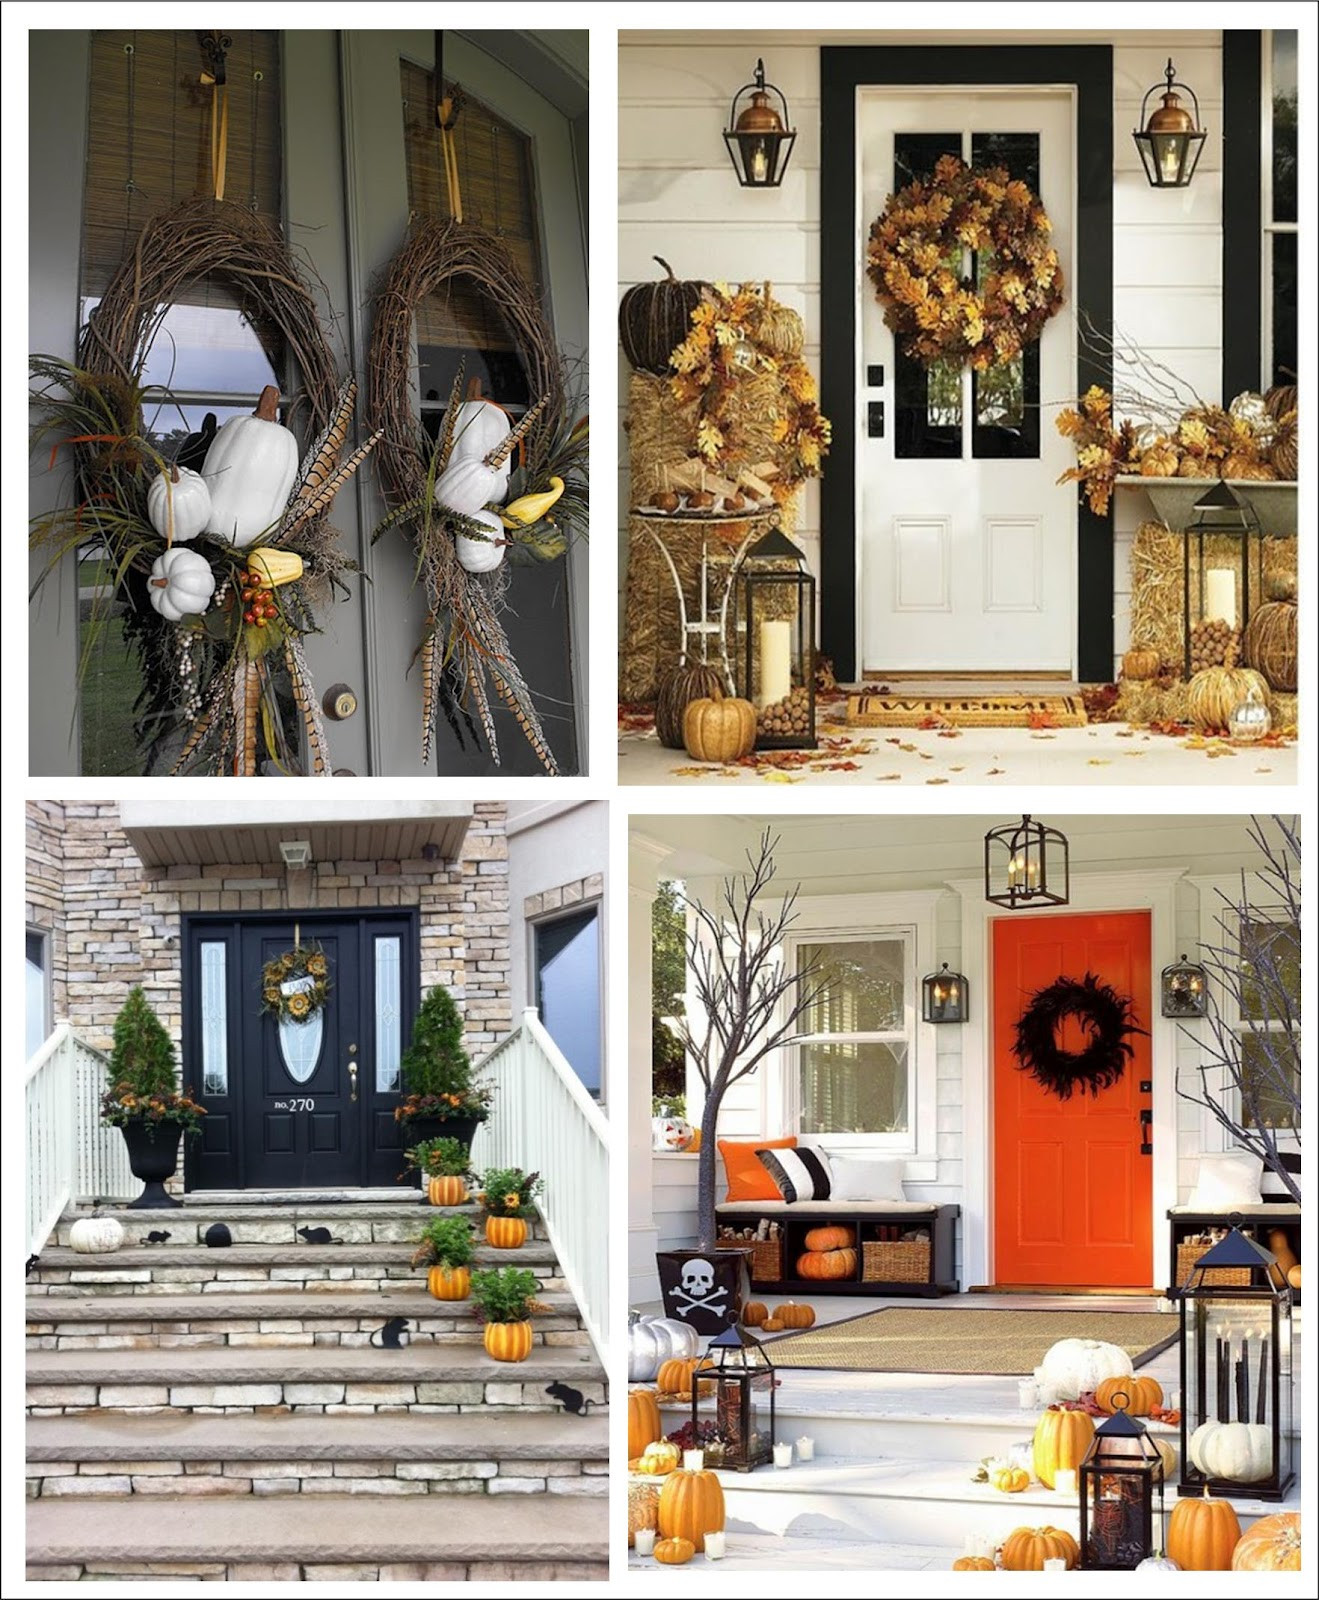 Halloween Porch Decorations
 It s Written on the Wall 90 Fall Porch Decorating Ideas